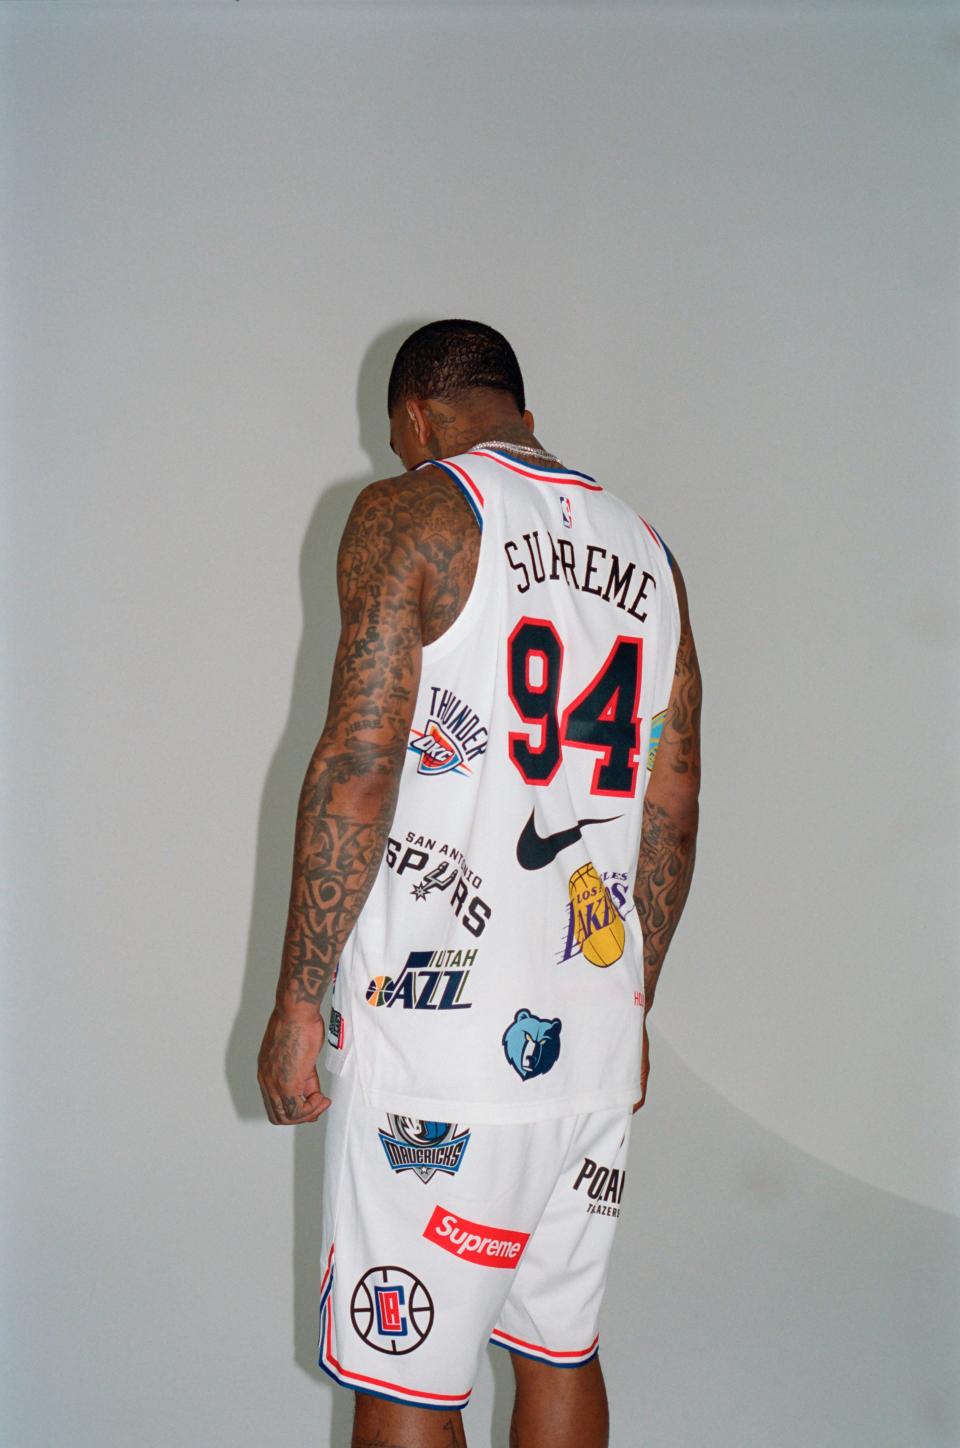 Supreme revives the spirit of NBA jeans.